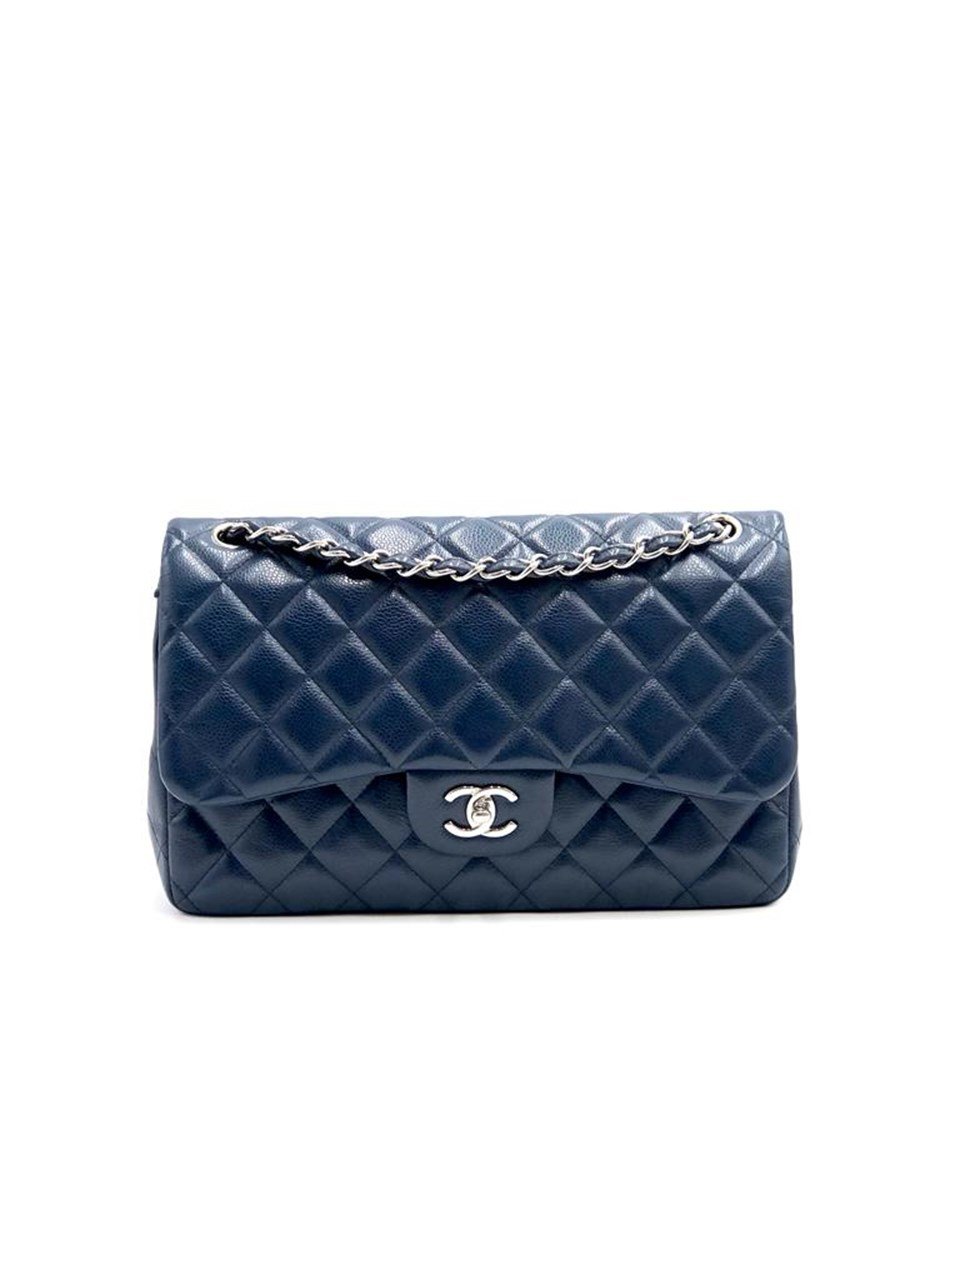 Chanel Navy Blue Quilted Caviar Double Flap Large Shoulder Bag